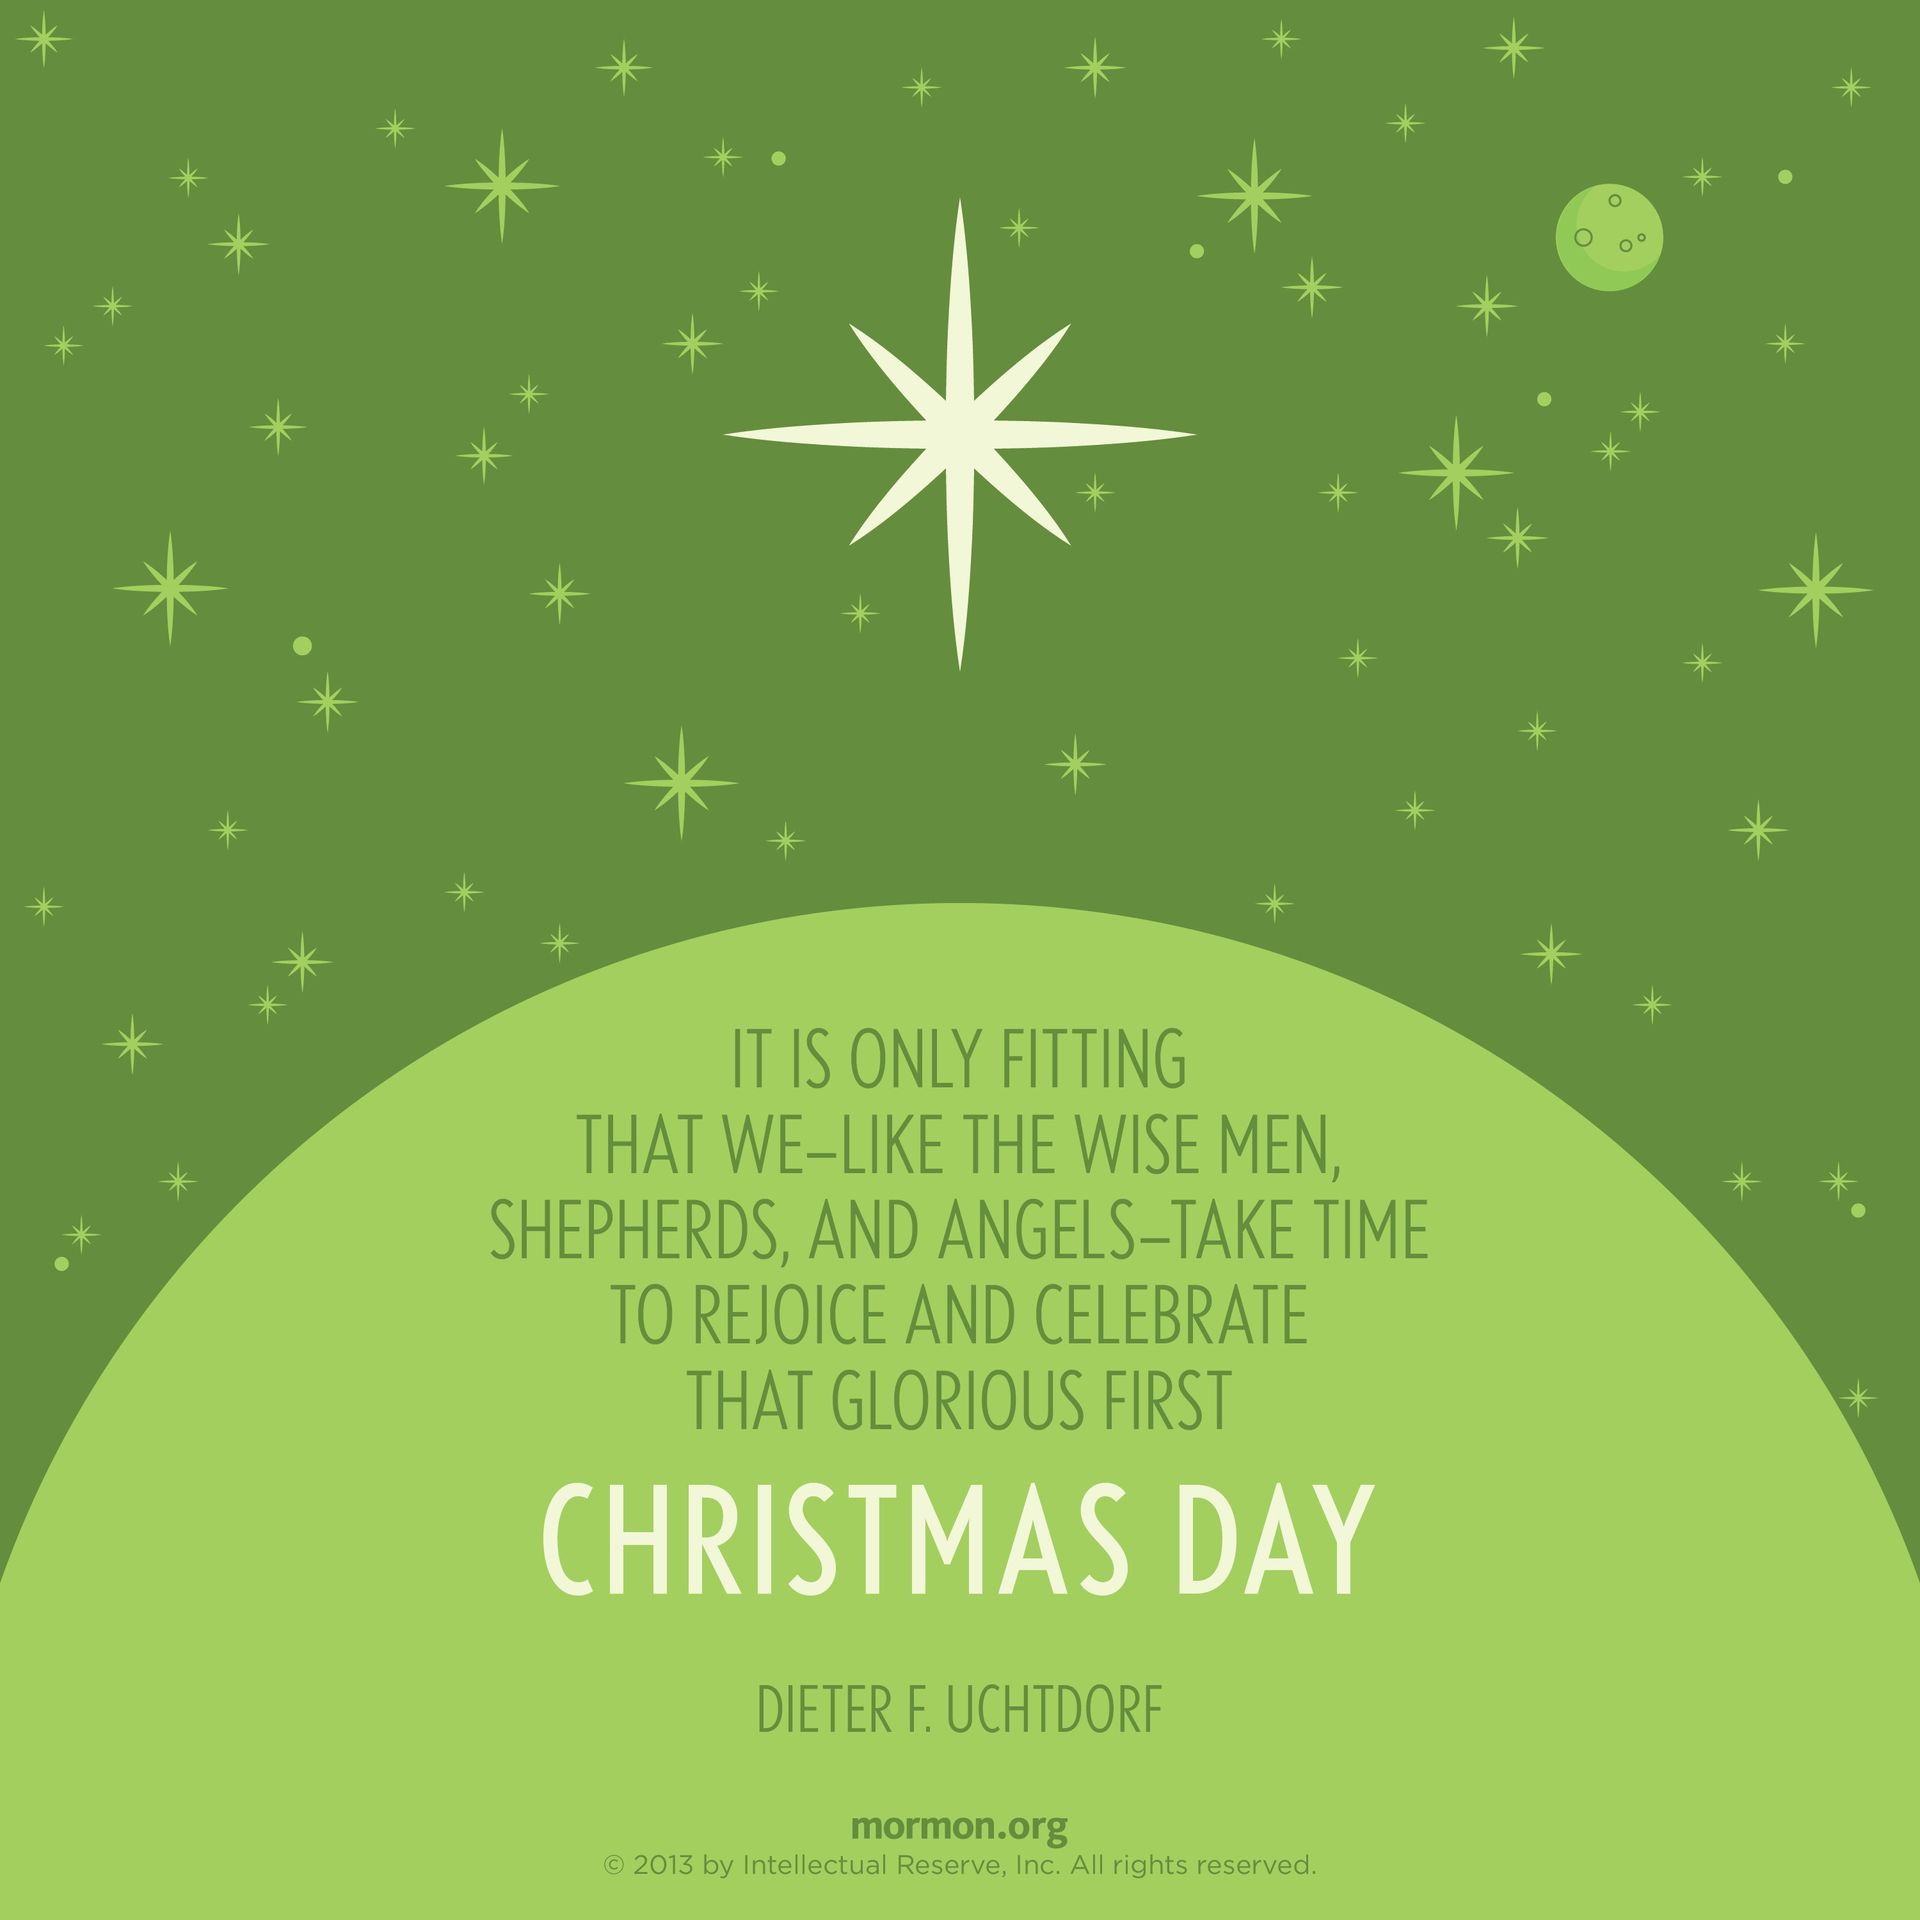 “It is only fitting that we—like the Wise Men, shepherds, and angels—take time to rejoice and celebrate that glorious first Christmas Day.”—President Dieter F. Uchtdorf, “Seeing Christmas through New Eyes”